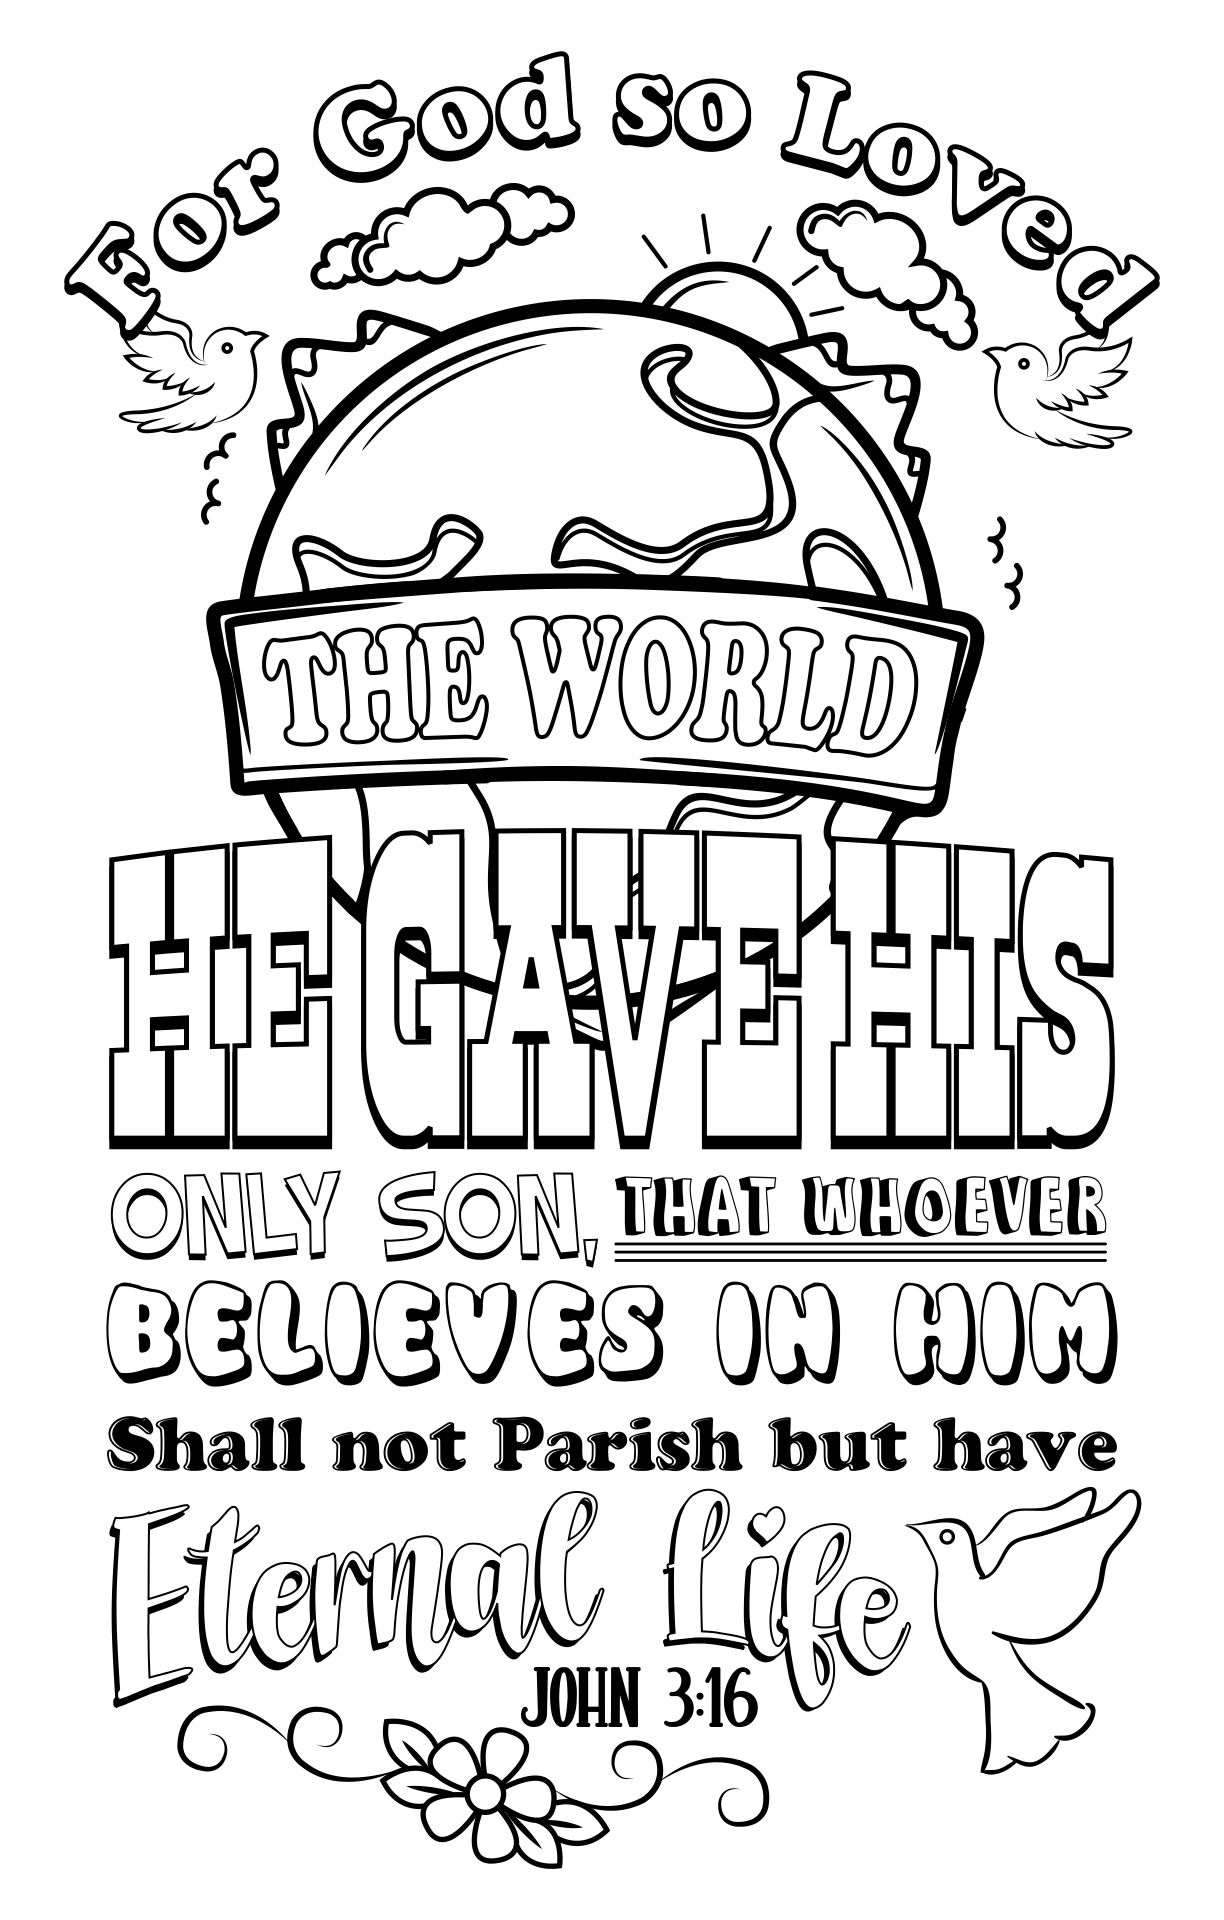 8 Best Images of Printable Coloring Page With John 3 16 John 3 16